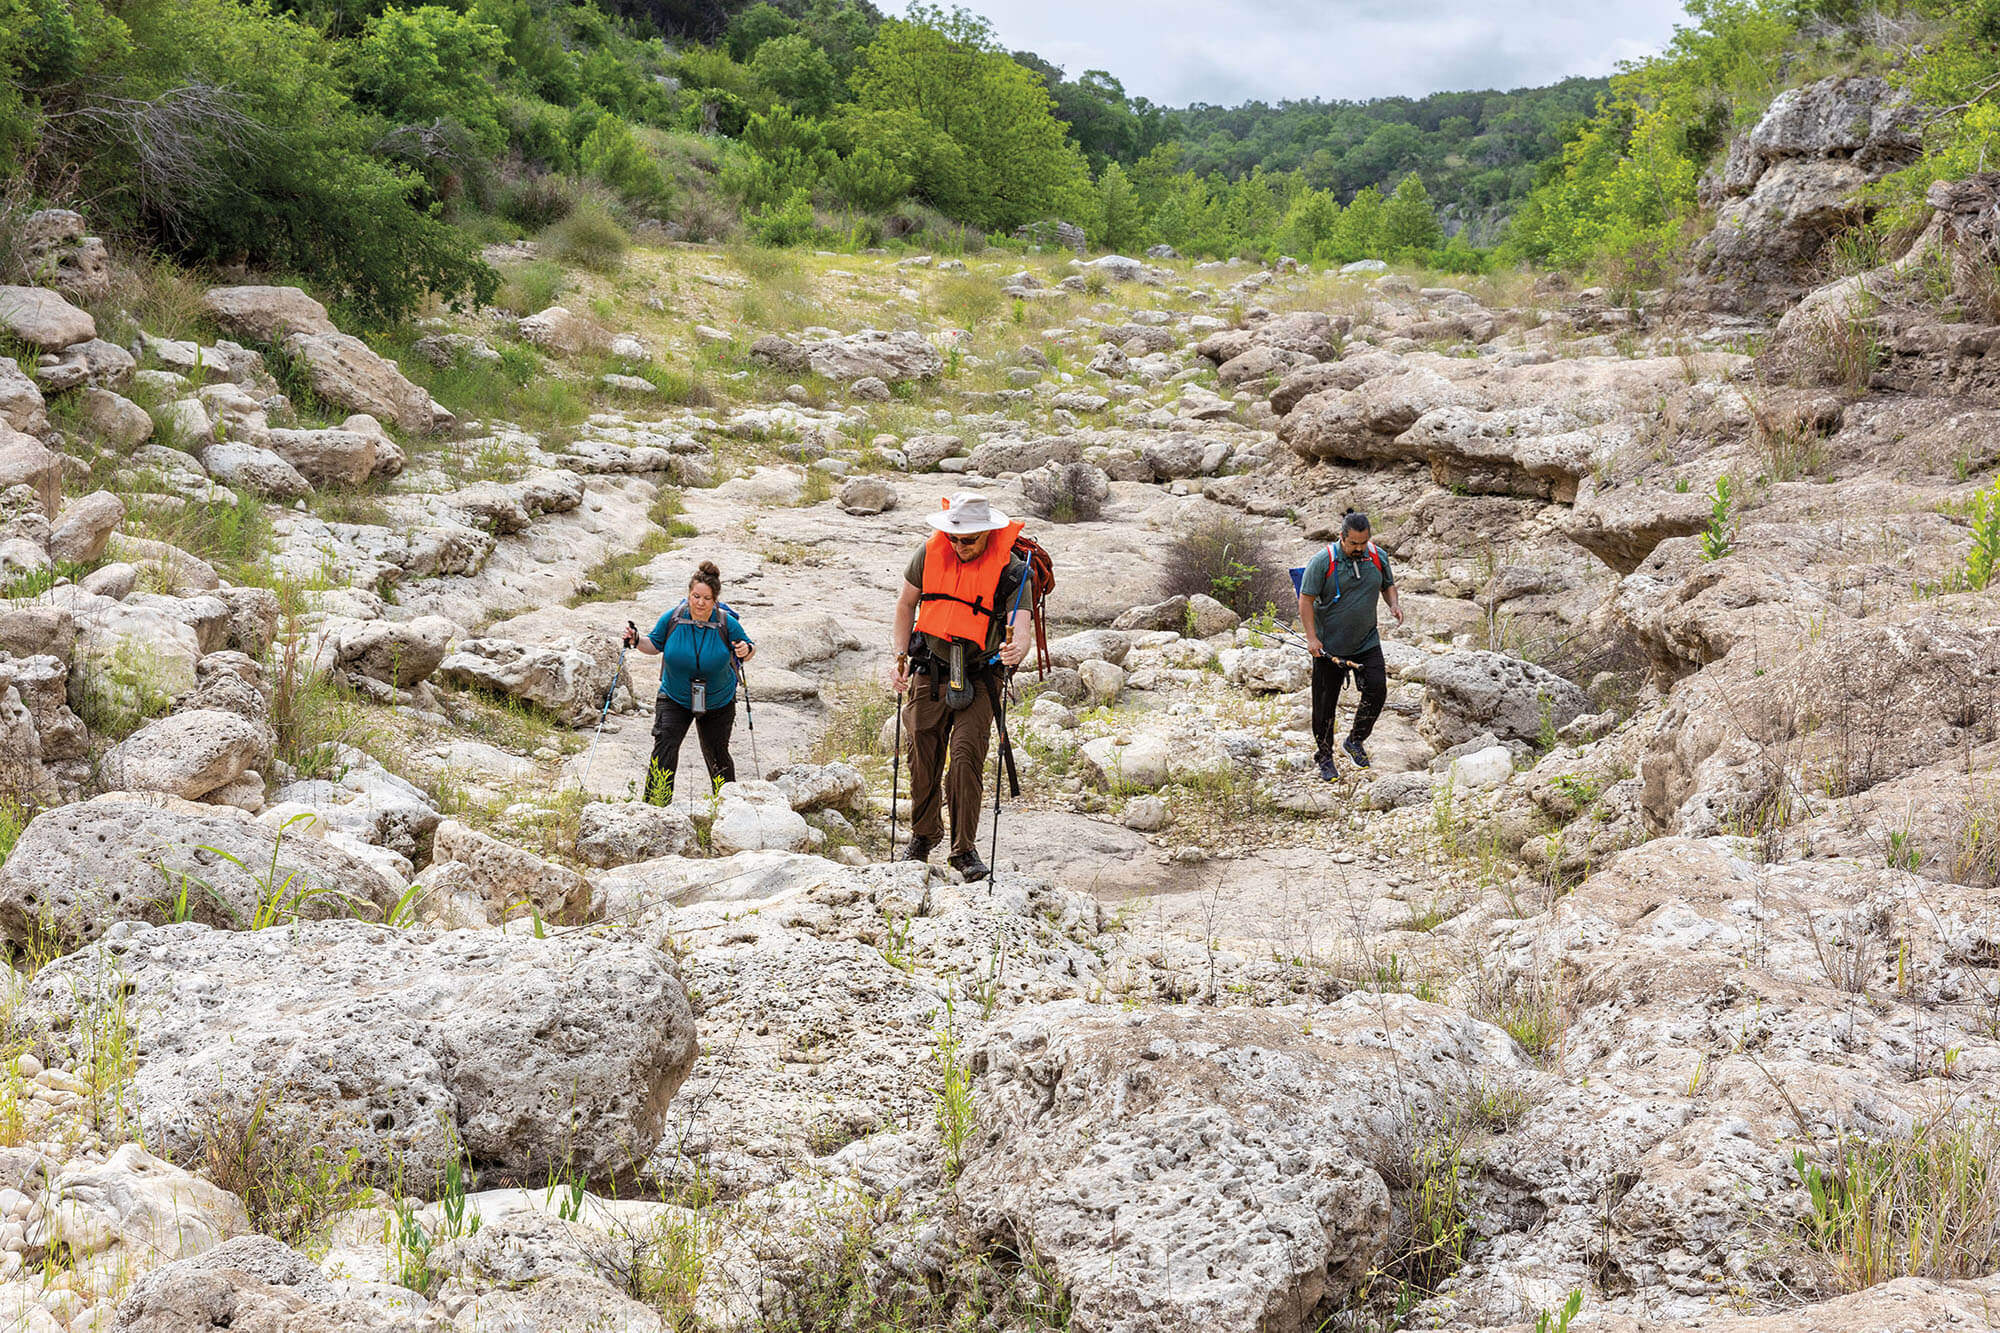 A group of people, one wearing an orange life vest, traverses a rocky landscape under green trees